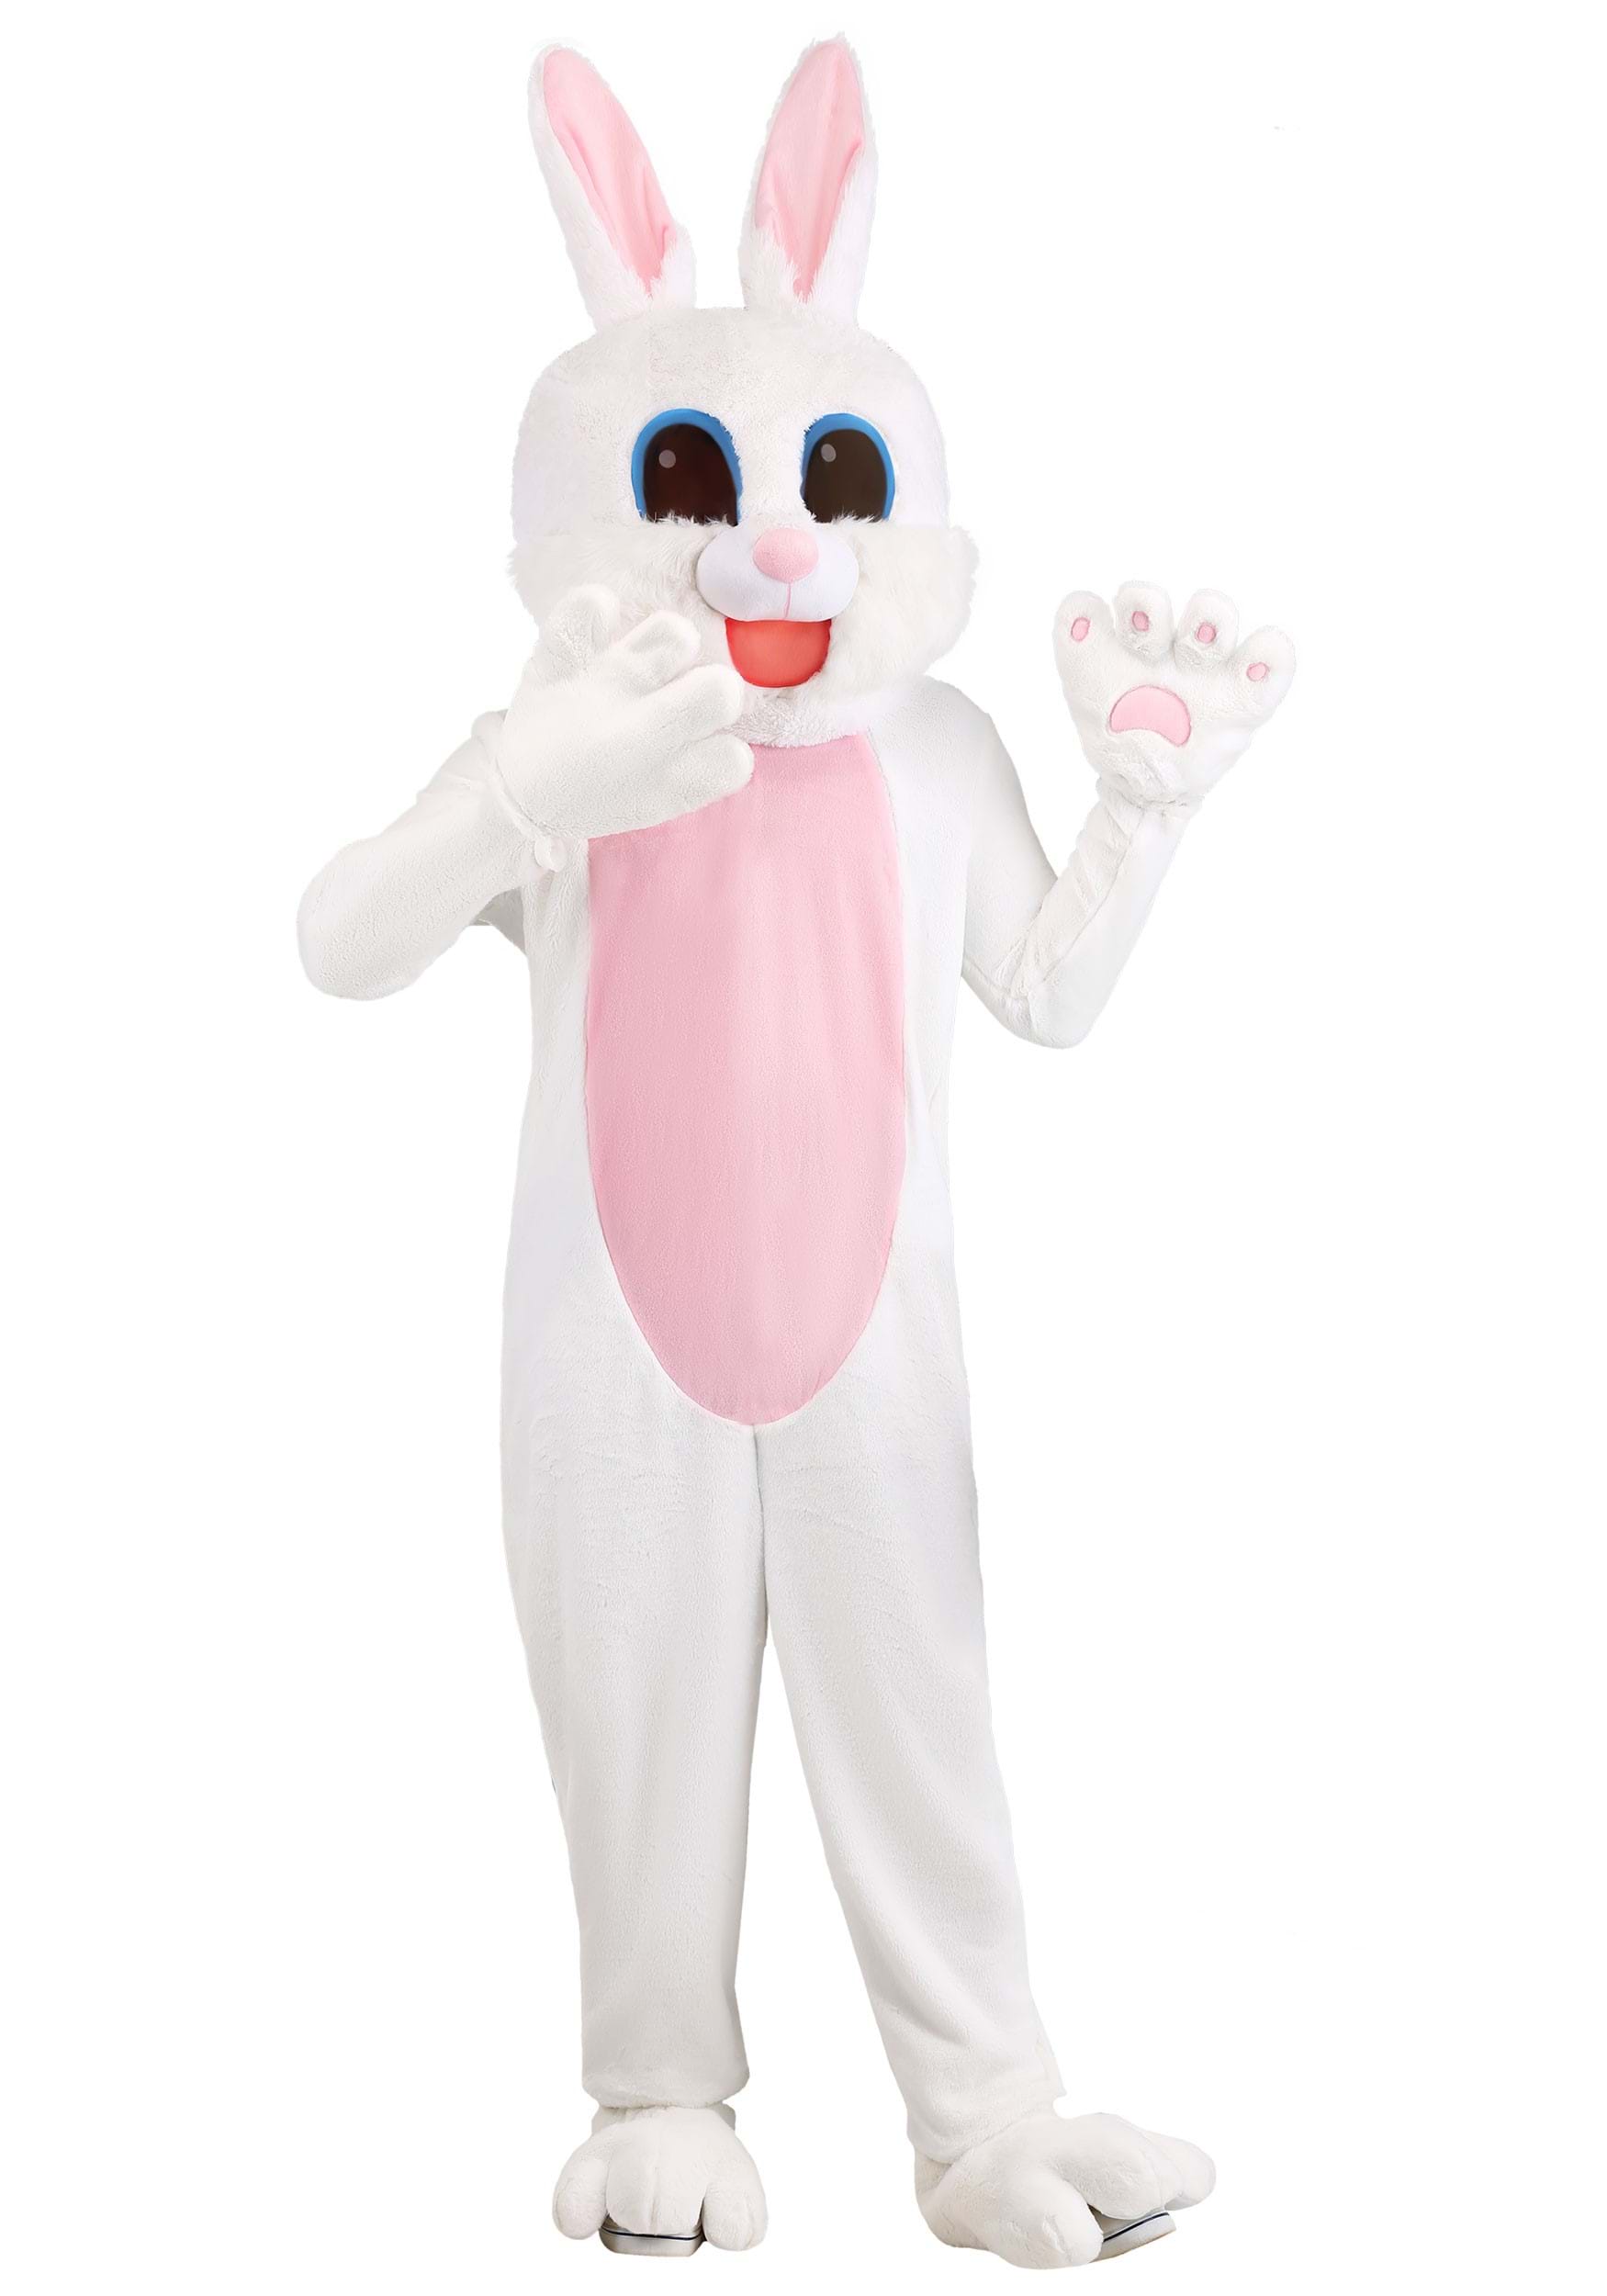 Photos - Fancy Dress Fancy FUN Costumes Plus Size Mascot Easter Bunny  Dress Costume for Adults 